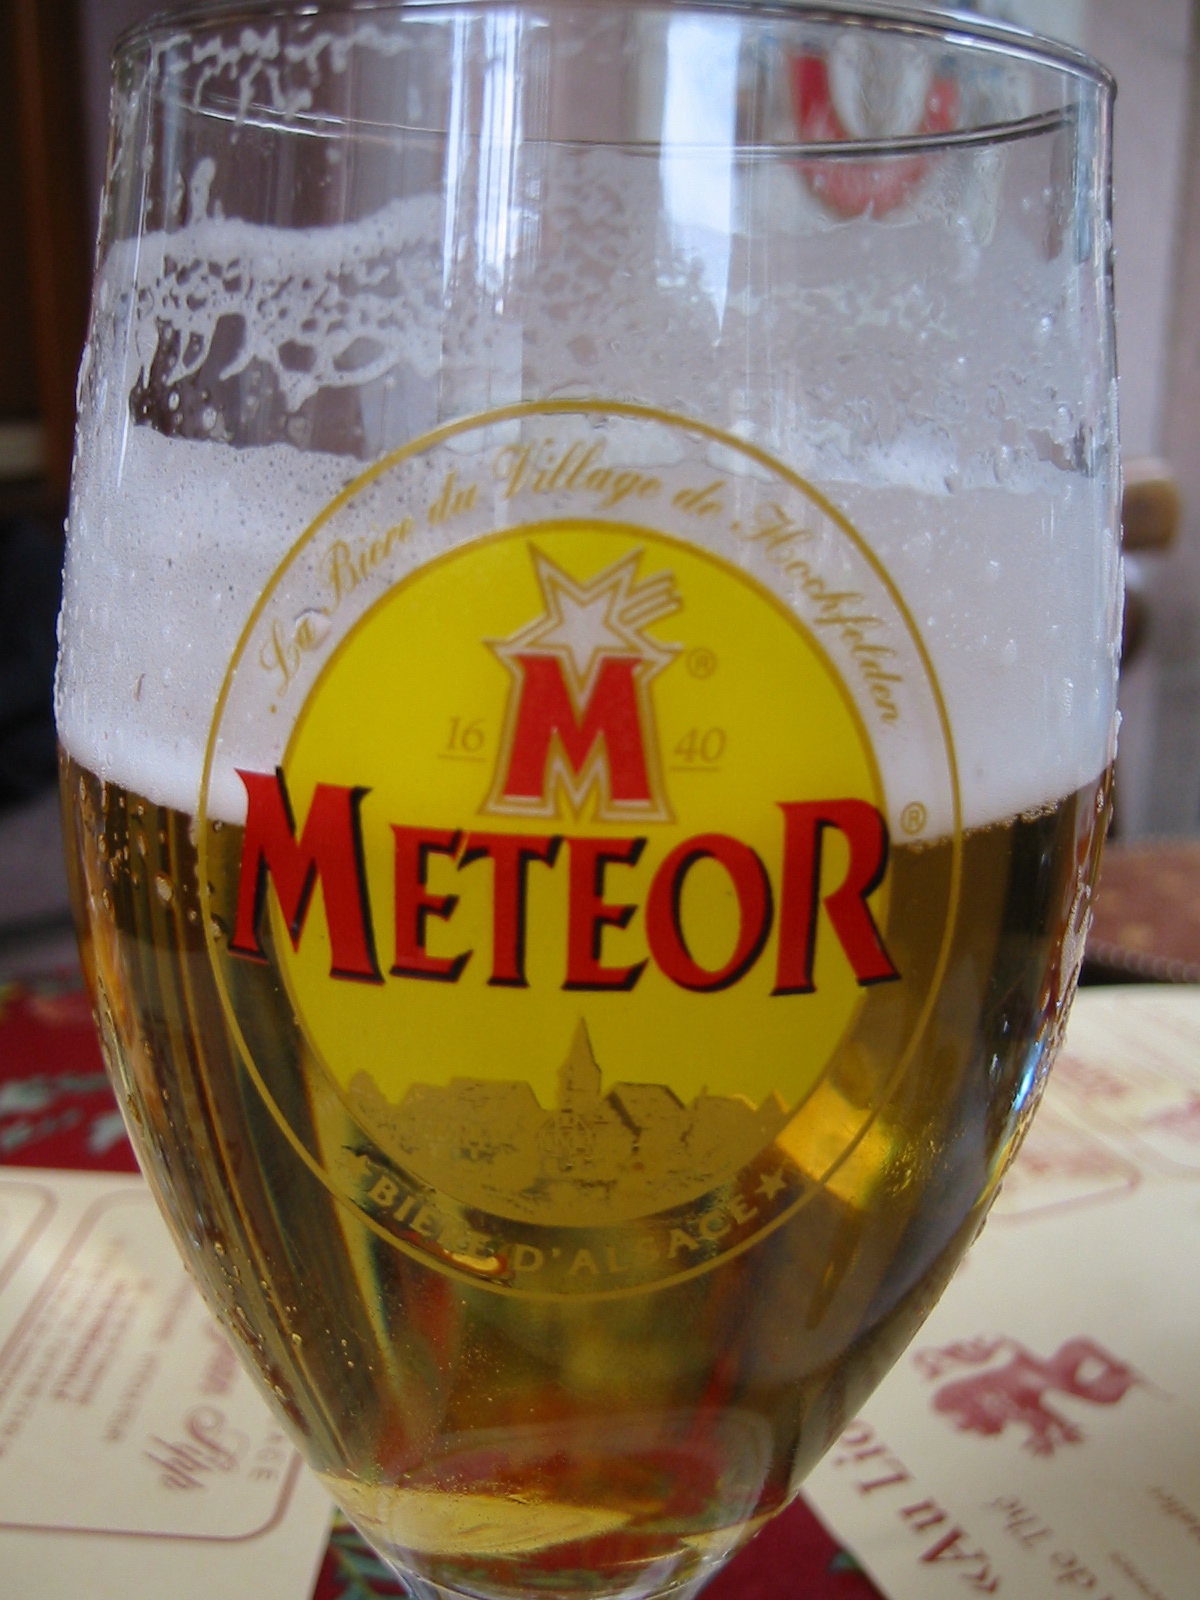 there is a glass that says meteor sitting on the table